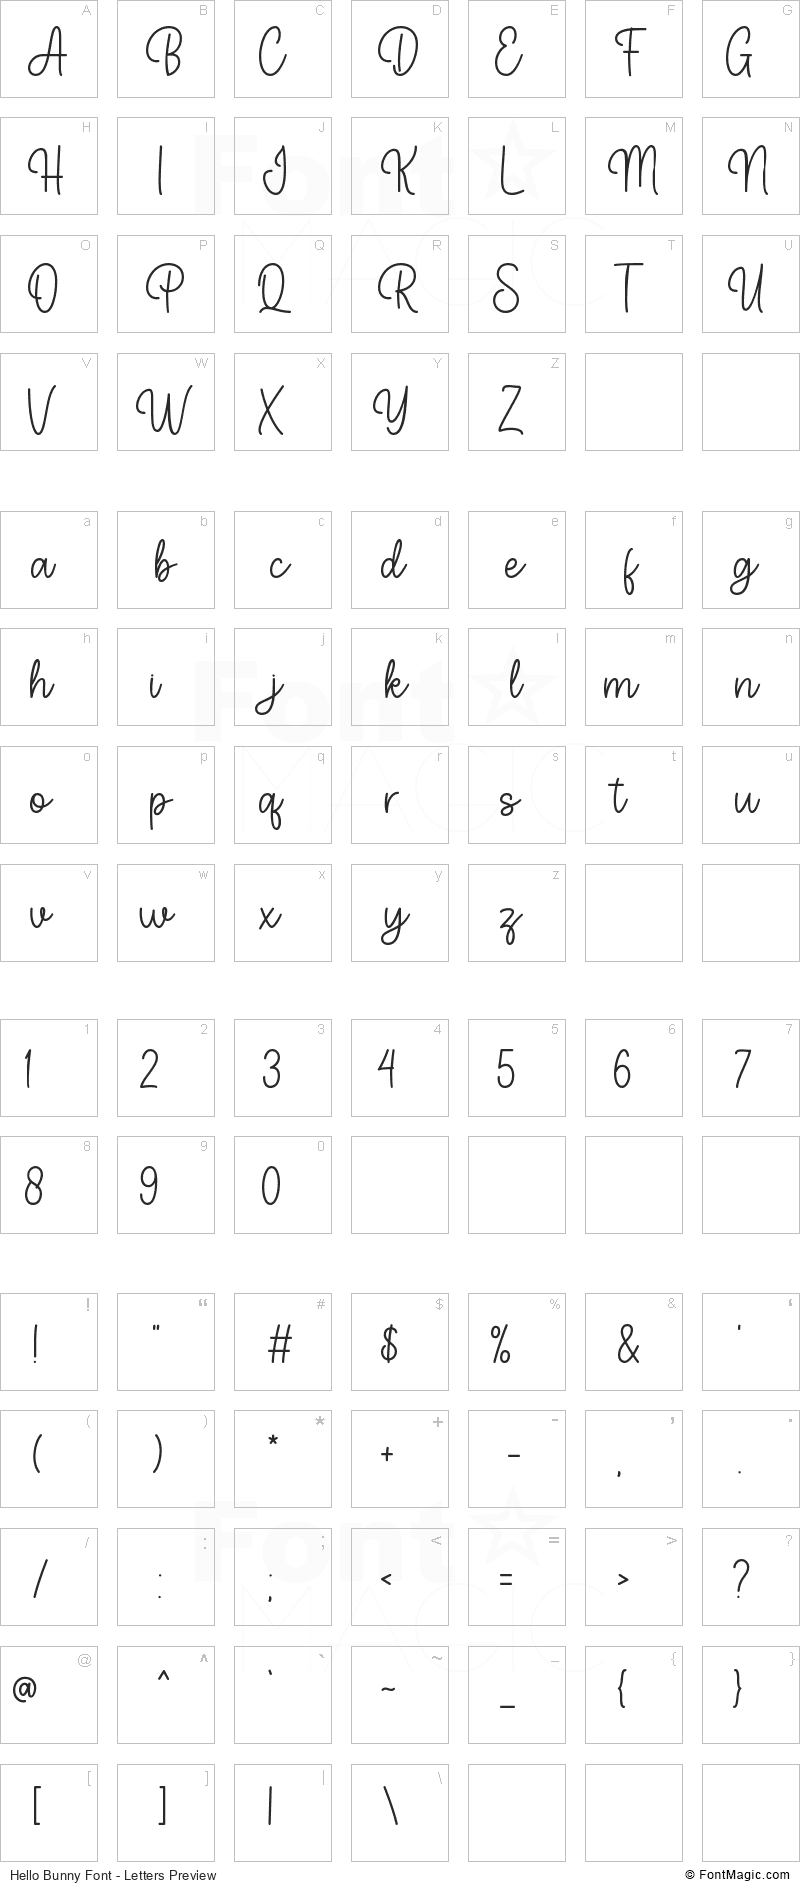 Hello Bunny Font - All Latters Preview Chart